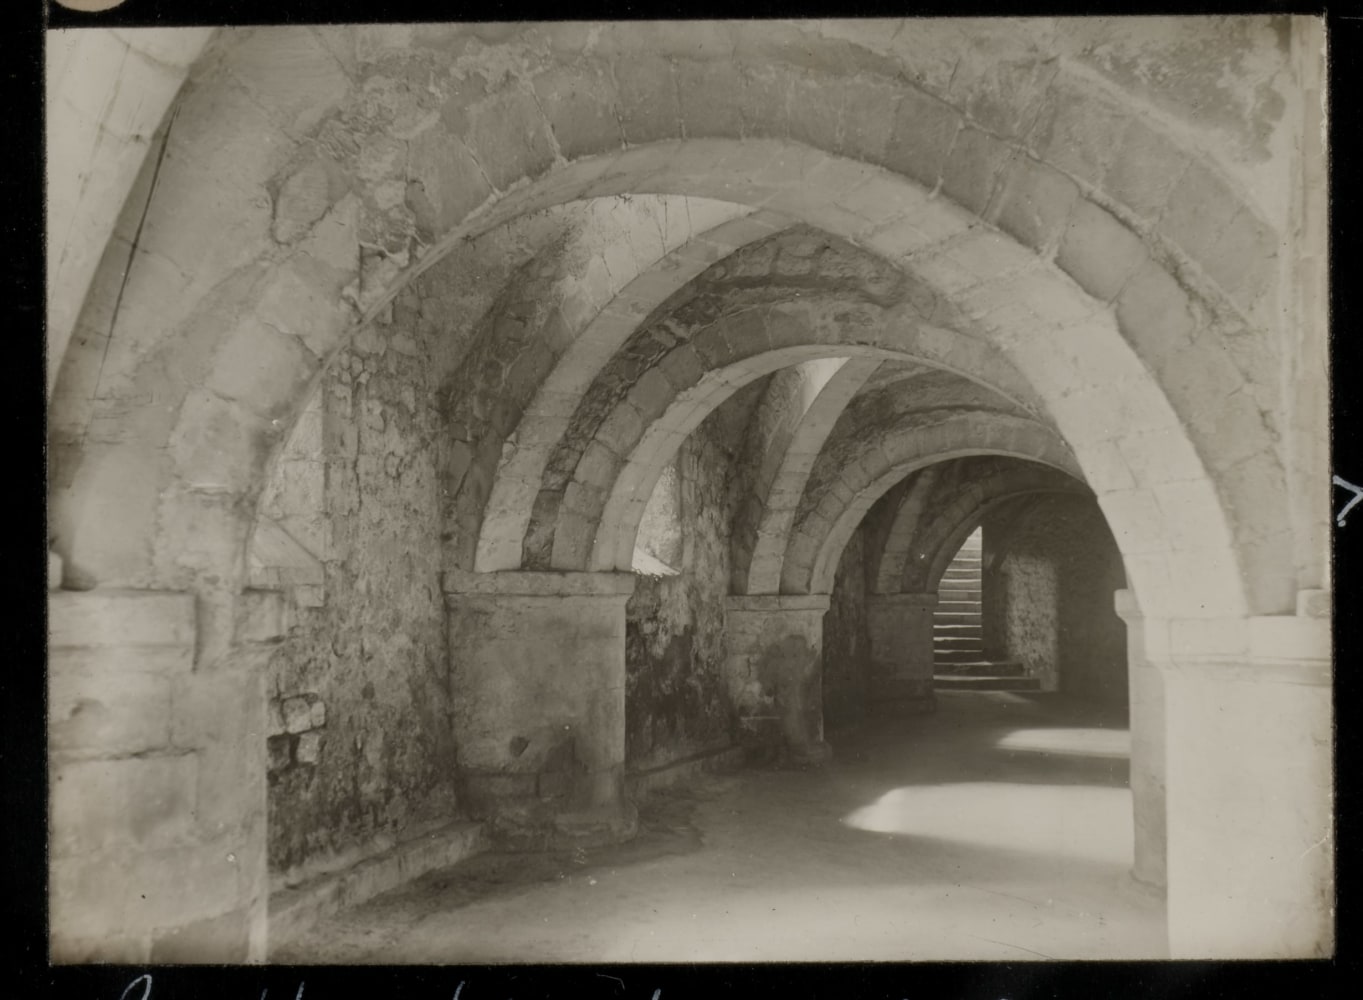 Frederick H. EVANS (English, 1853-1943) &quot;Gloucester Cathedral. Crypt and steps out&quot;, 1890 Lantern slide 5.1 x 6.9 cm on 8.2 x 8.2 cm glass slide Signed &quot;F. H. Evans&quot;, titled and dated with &quot;83.&quot; and &quot;X&quot; in white ink on the paper mask